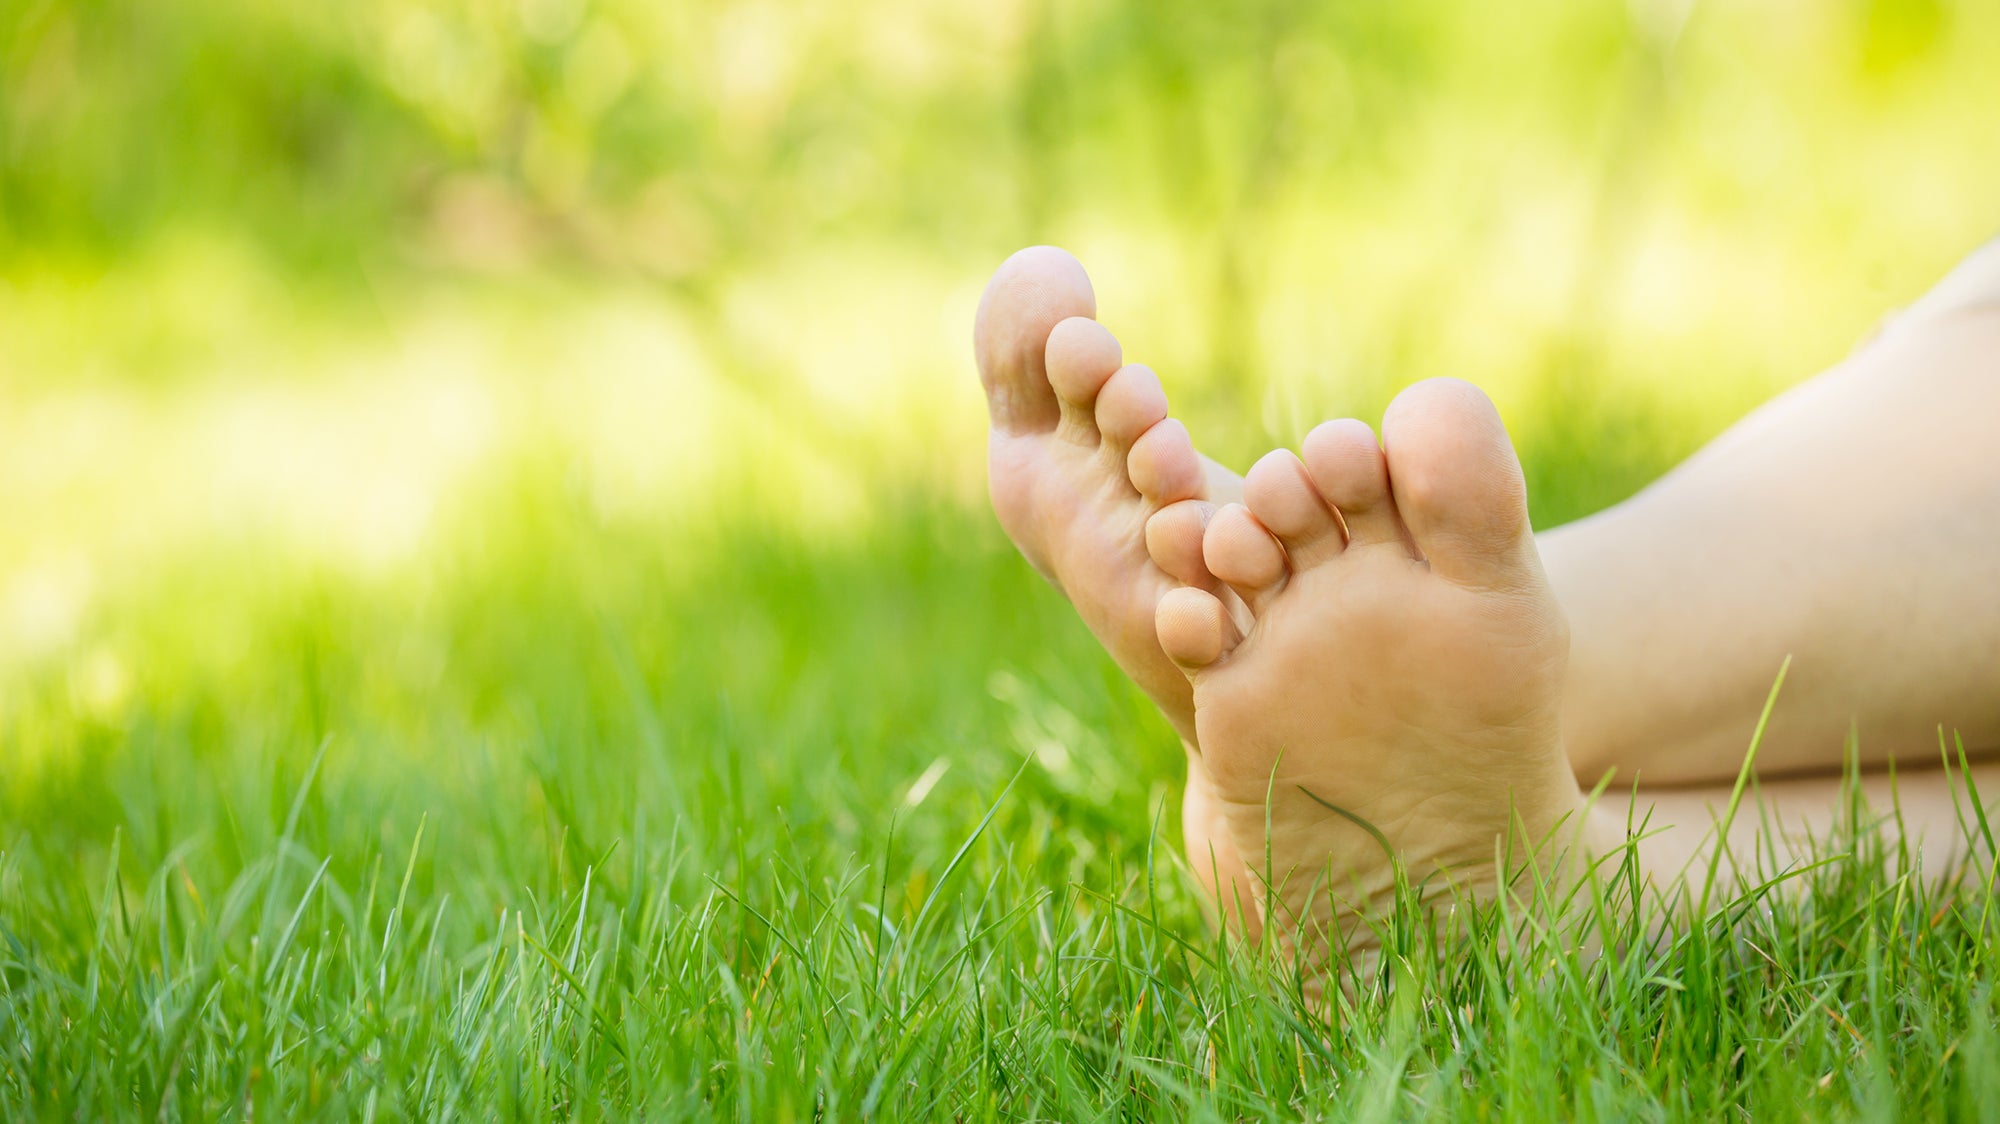 Sprained Toe - Symptoms, Causes, Treatment and Recovery